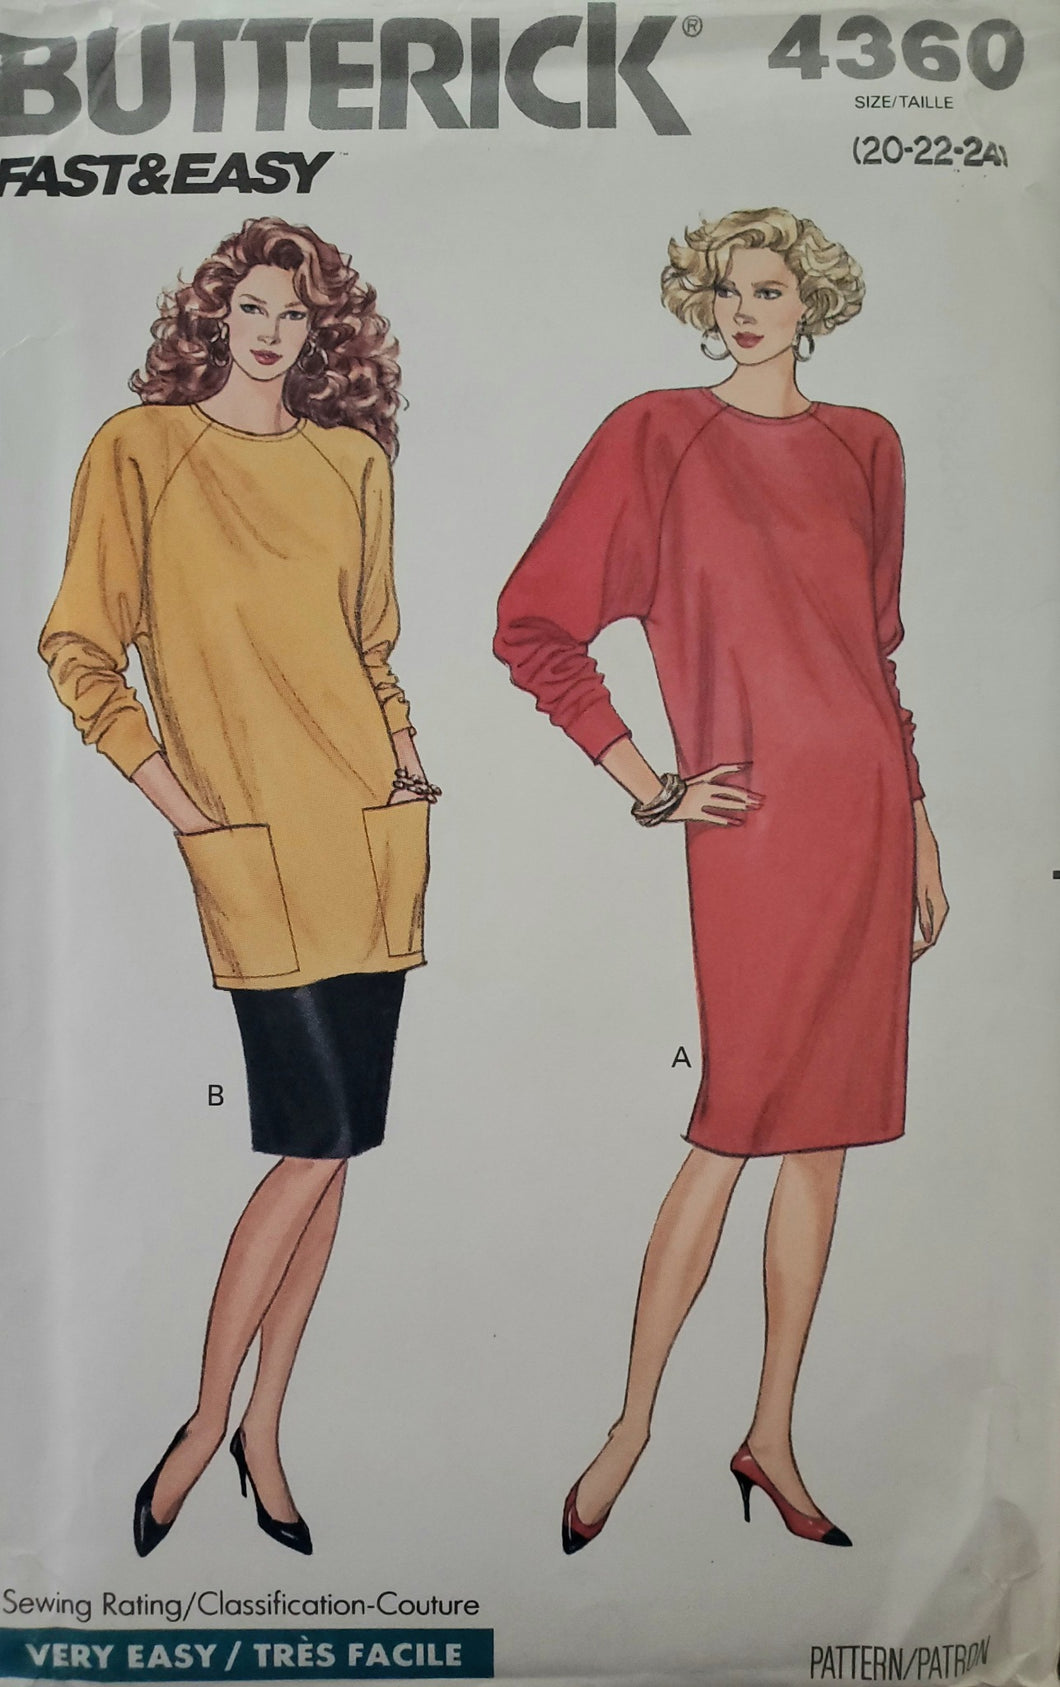 Butterick 4360 UNCUT, Fast & Easy - Misses Raglan Sleeve Dress and Tunic Size 20-22-24